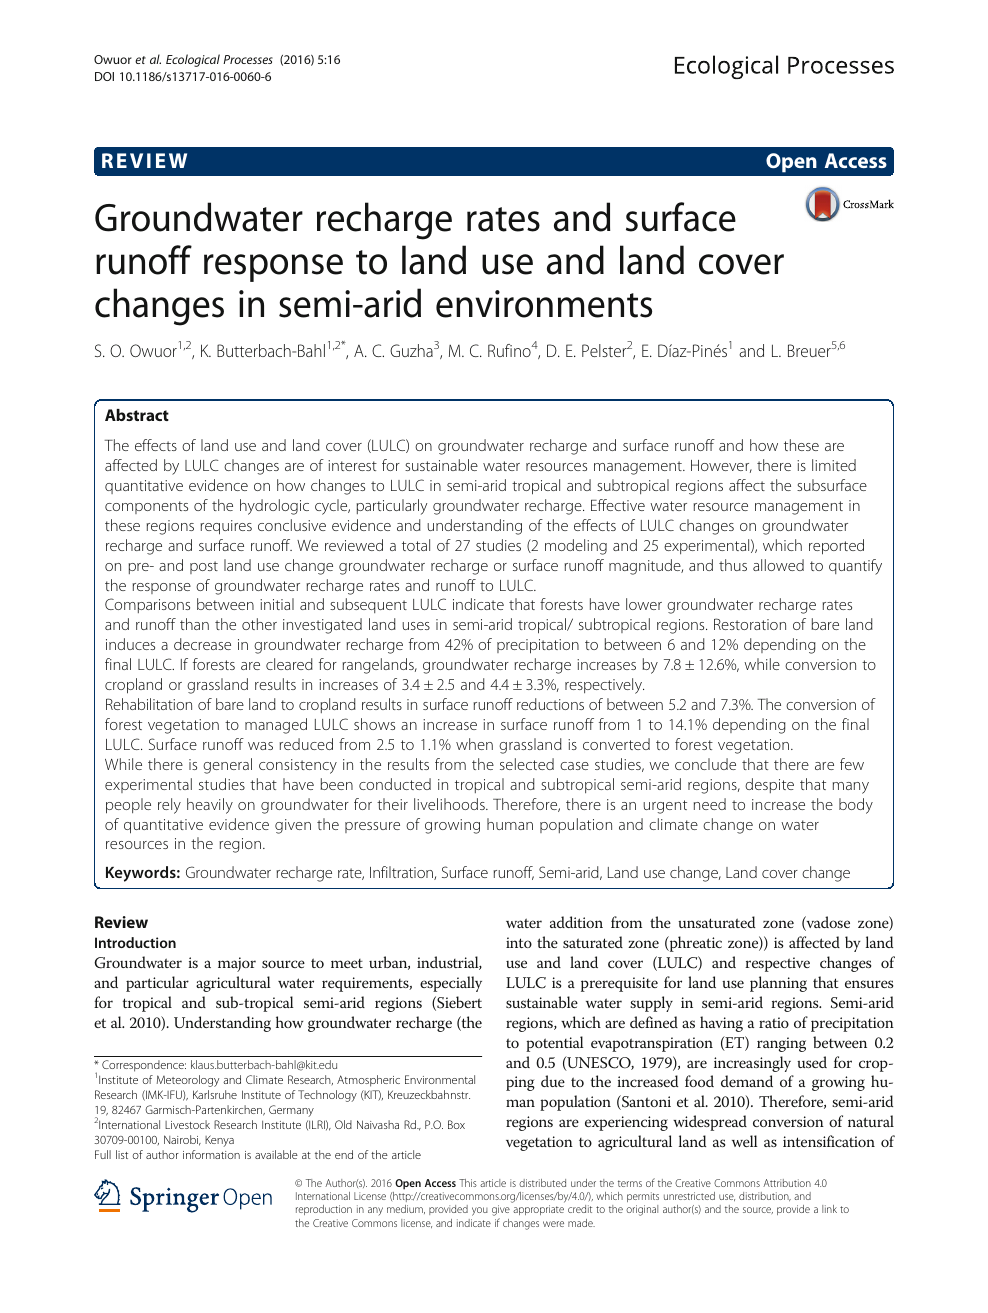 Groundwater Recharge Rates And Surface Runoff Response To Land Use And Land Cover Changes In Semi Arid Environments Topic Of Research Paper In Earth And Related Environmental Sciences Download Scholarly Article Pdf